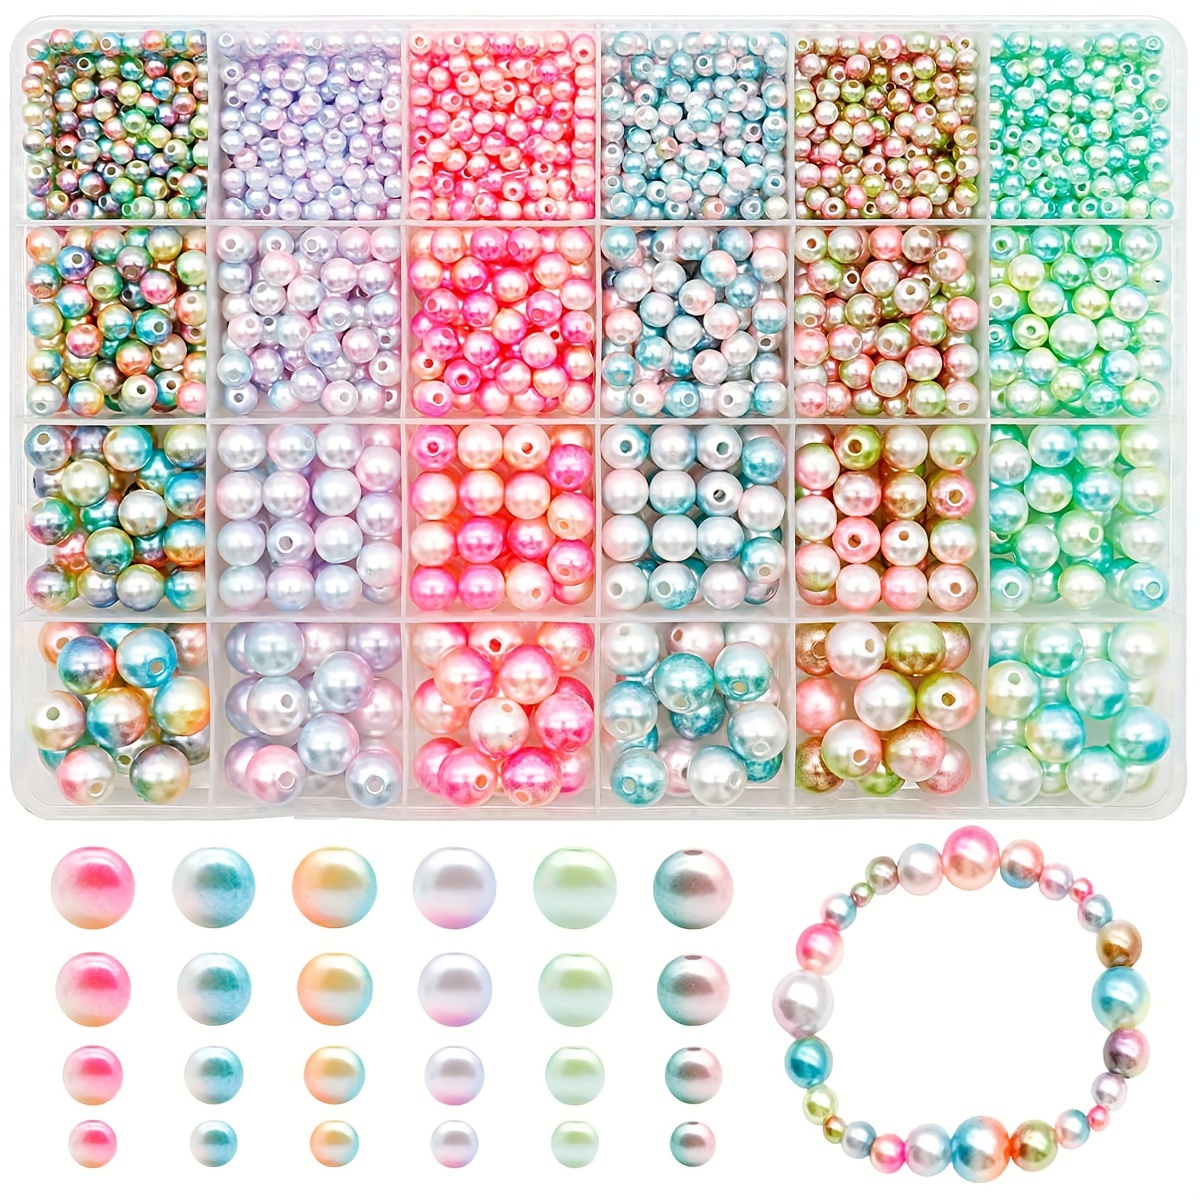 

1890pcs/box 4-10mm Mermaid Color Acrylic Loose Spacer Beads For Jewelry Making Diy Necklace Bracelet Earrings Other Decors Handmade Craft Supplies